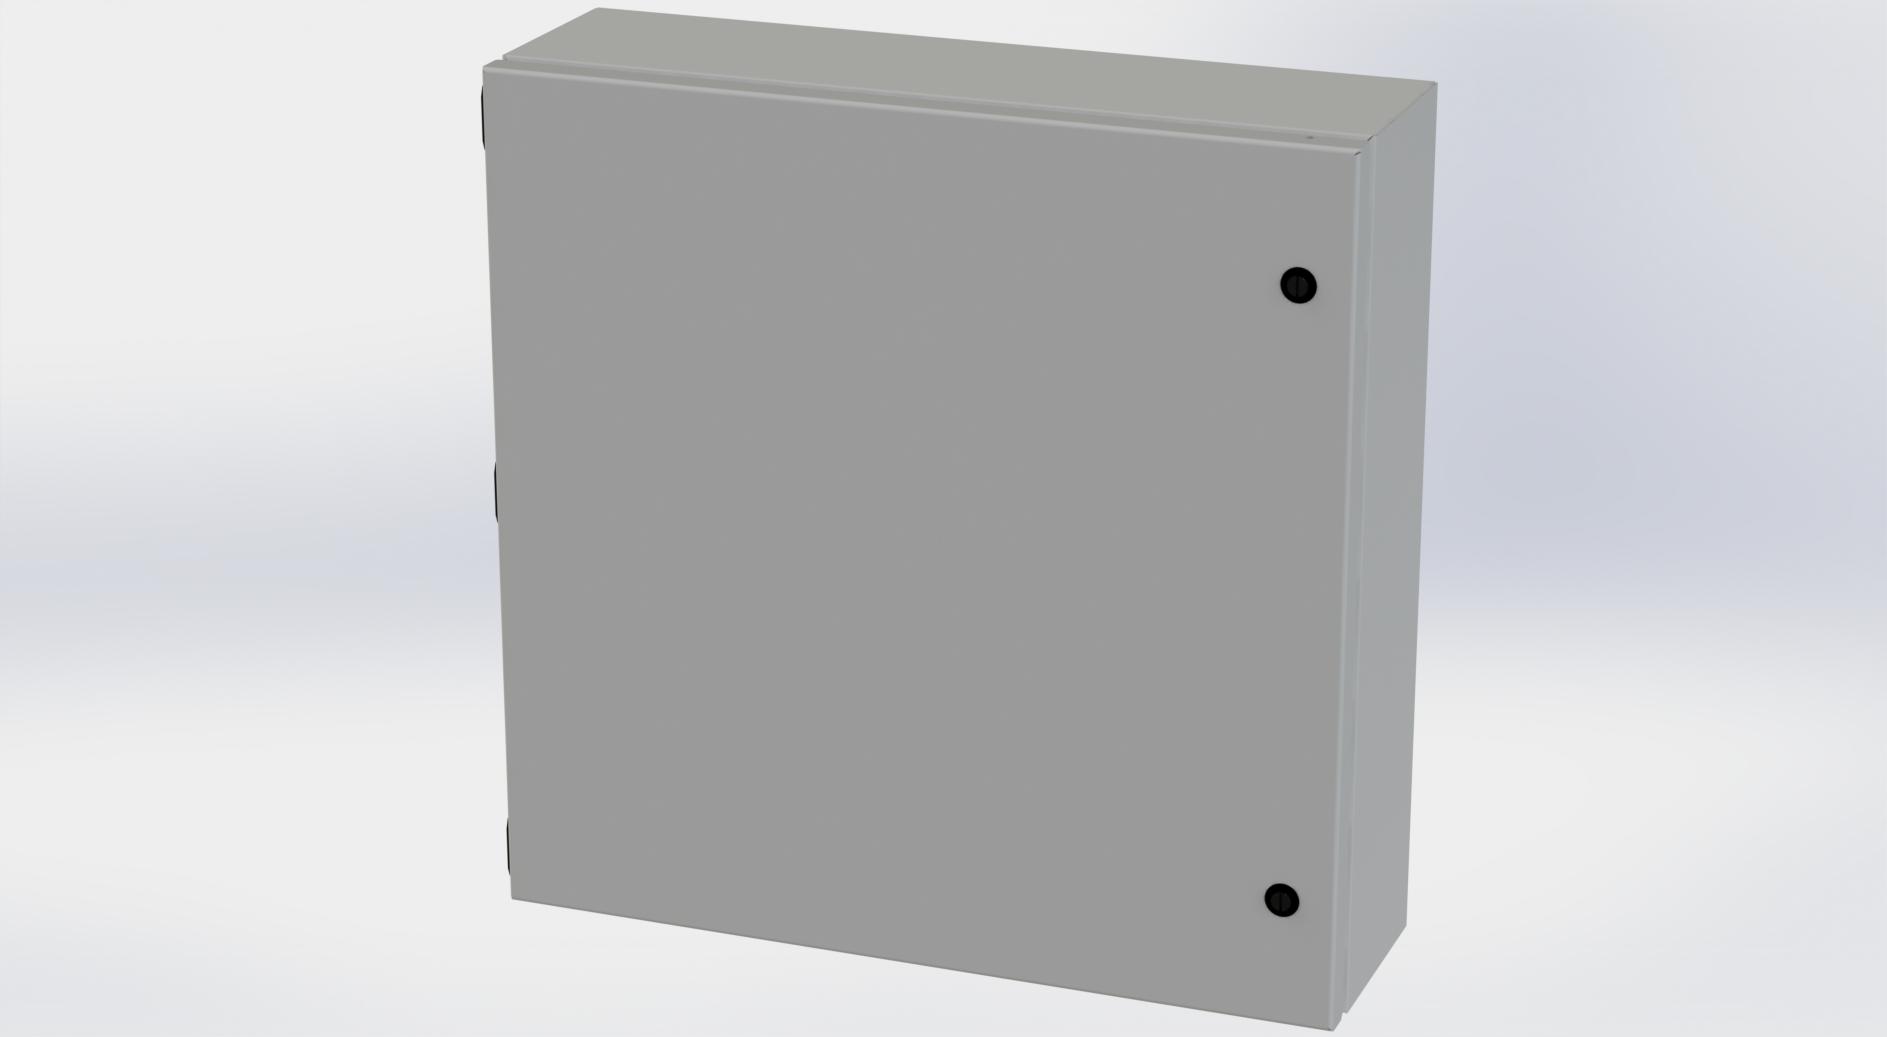 Saginaw Control SCE-20206ELJ ELJ Enclosure, Height:20.00", Width:20.00", Depth:6.00", ANSI-61 gray powder coating inside and out. Optional sub-panels are powder coated white.